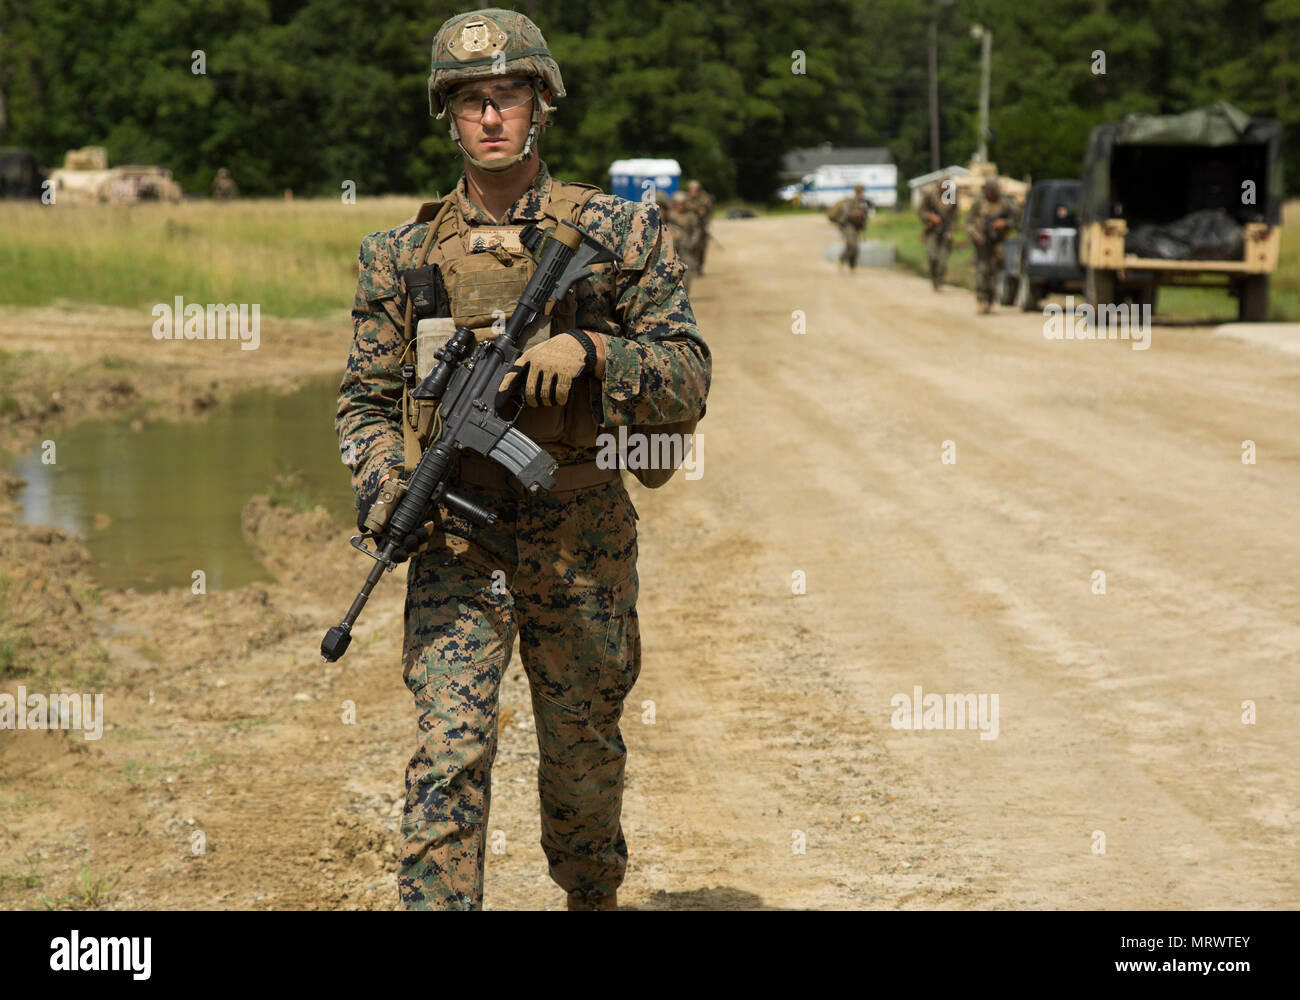 U.S. Marine Corps Cpl. Mitchell Brinkman, rifleman, with Alpha Company, 1st Battalion, 8th Marine Regiment, (1/8) 2nd Marine Division (2nd MARDIV) patrols during the Marine Corps Combat Readiness Evaluation (MCCRE), on Camp Lejeune, N.C., June 21, 2017. MCCRE was conducted to enhance and promote unit readiness for upcoming deployments. (U.S. Marine Corps photo by Cpl. John A. Hamilton Jr) Stock Photo